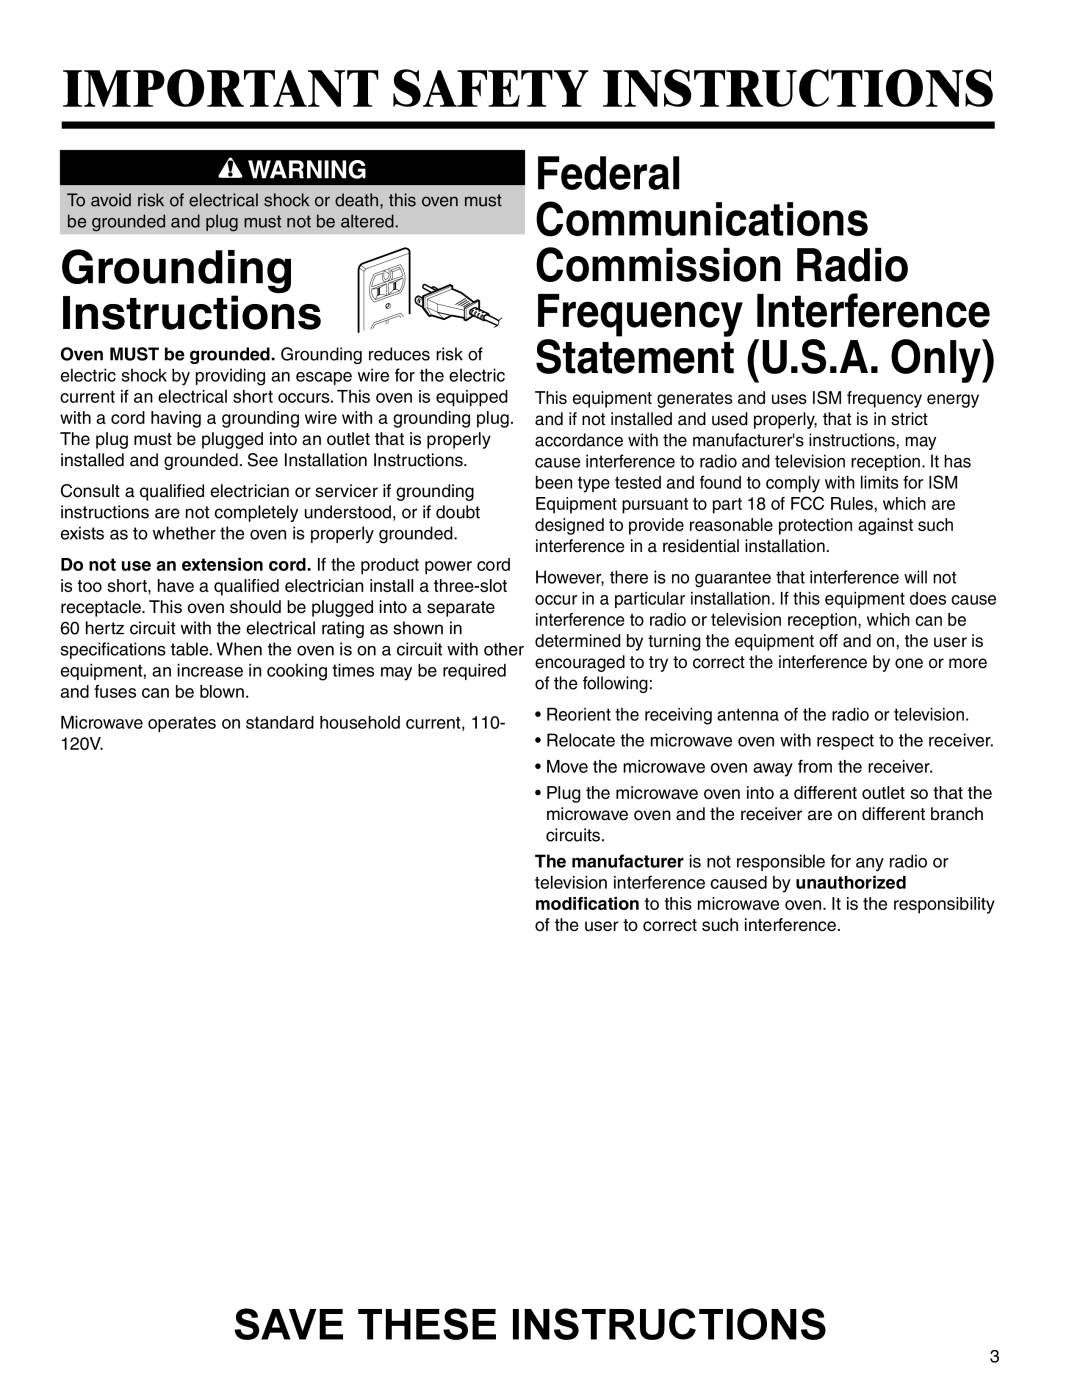 Maytag MMV4205BA Grounding Instructions, Federal Communications Commission Radio, Important Safety Instructions 